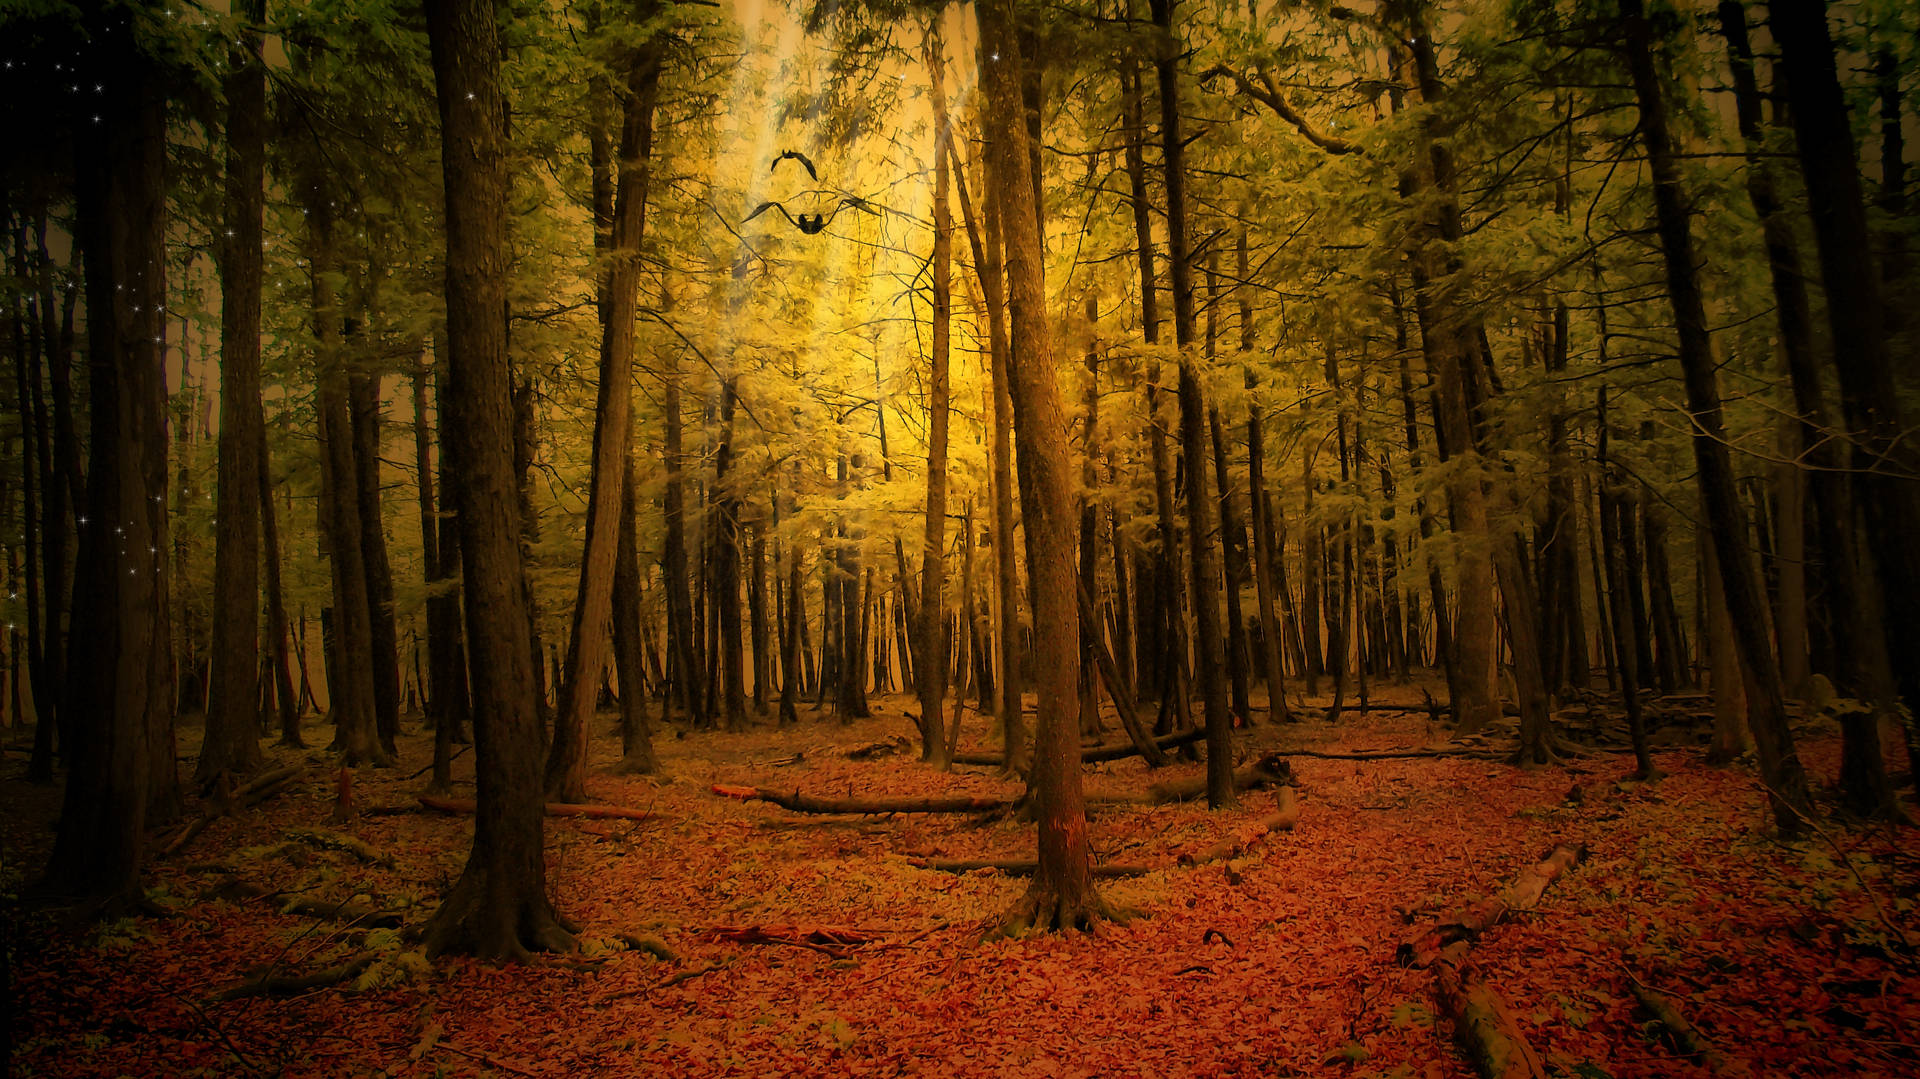 Explore The Golden Beauty Of Autumn In This Magical Forest. Wallpaper